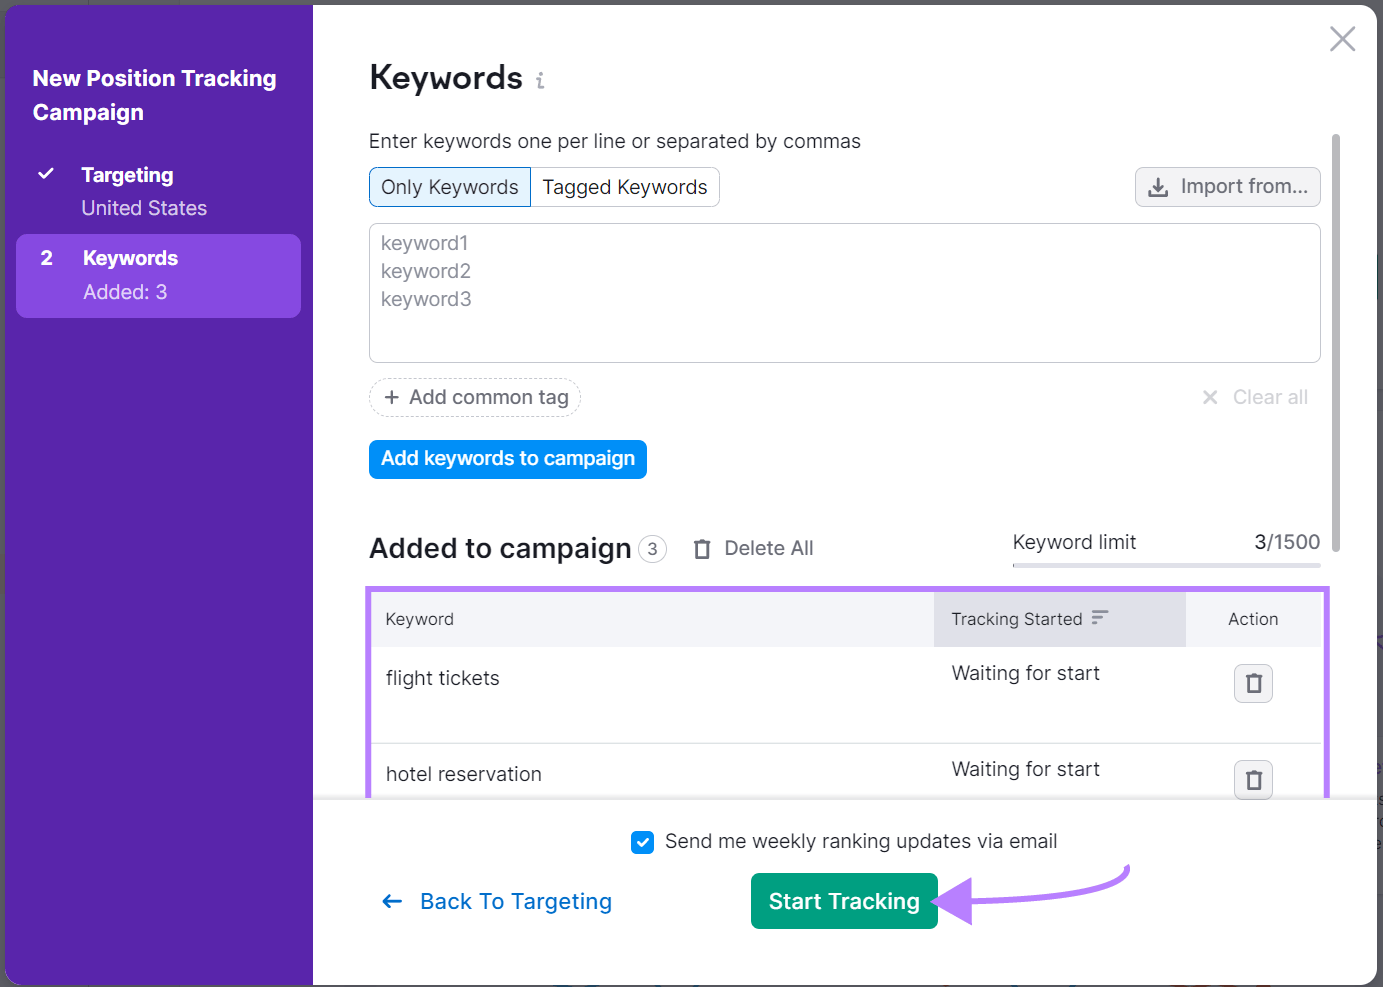 "Keywords" window in Position Tracking tool settings